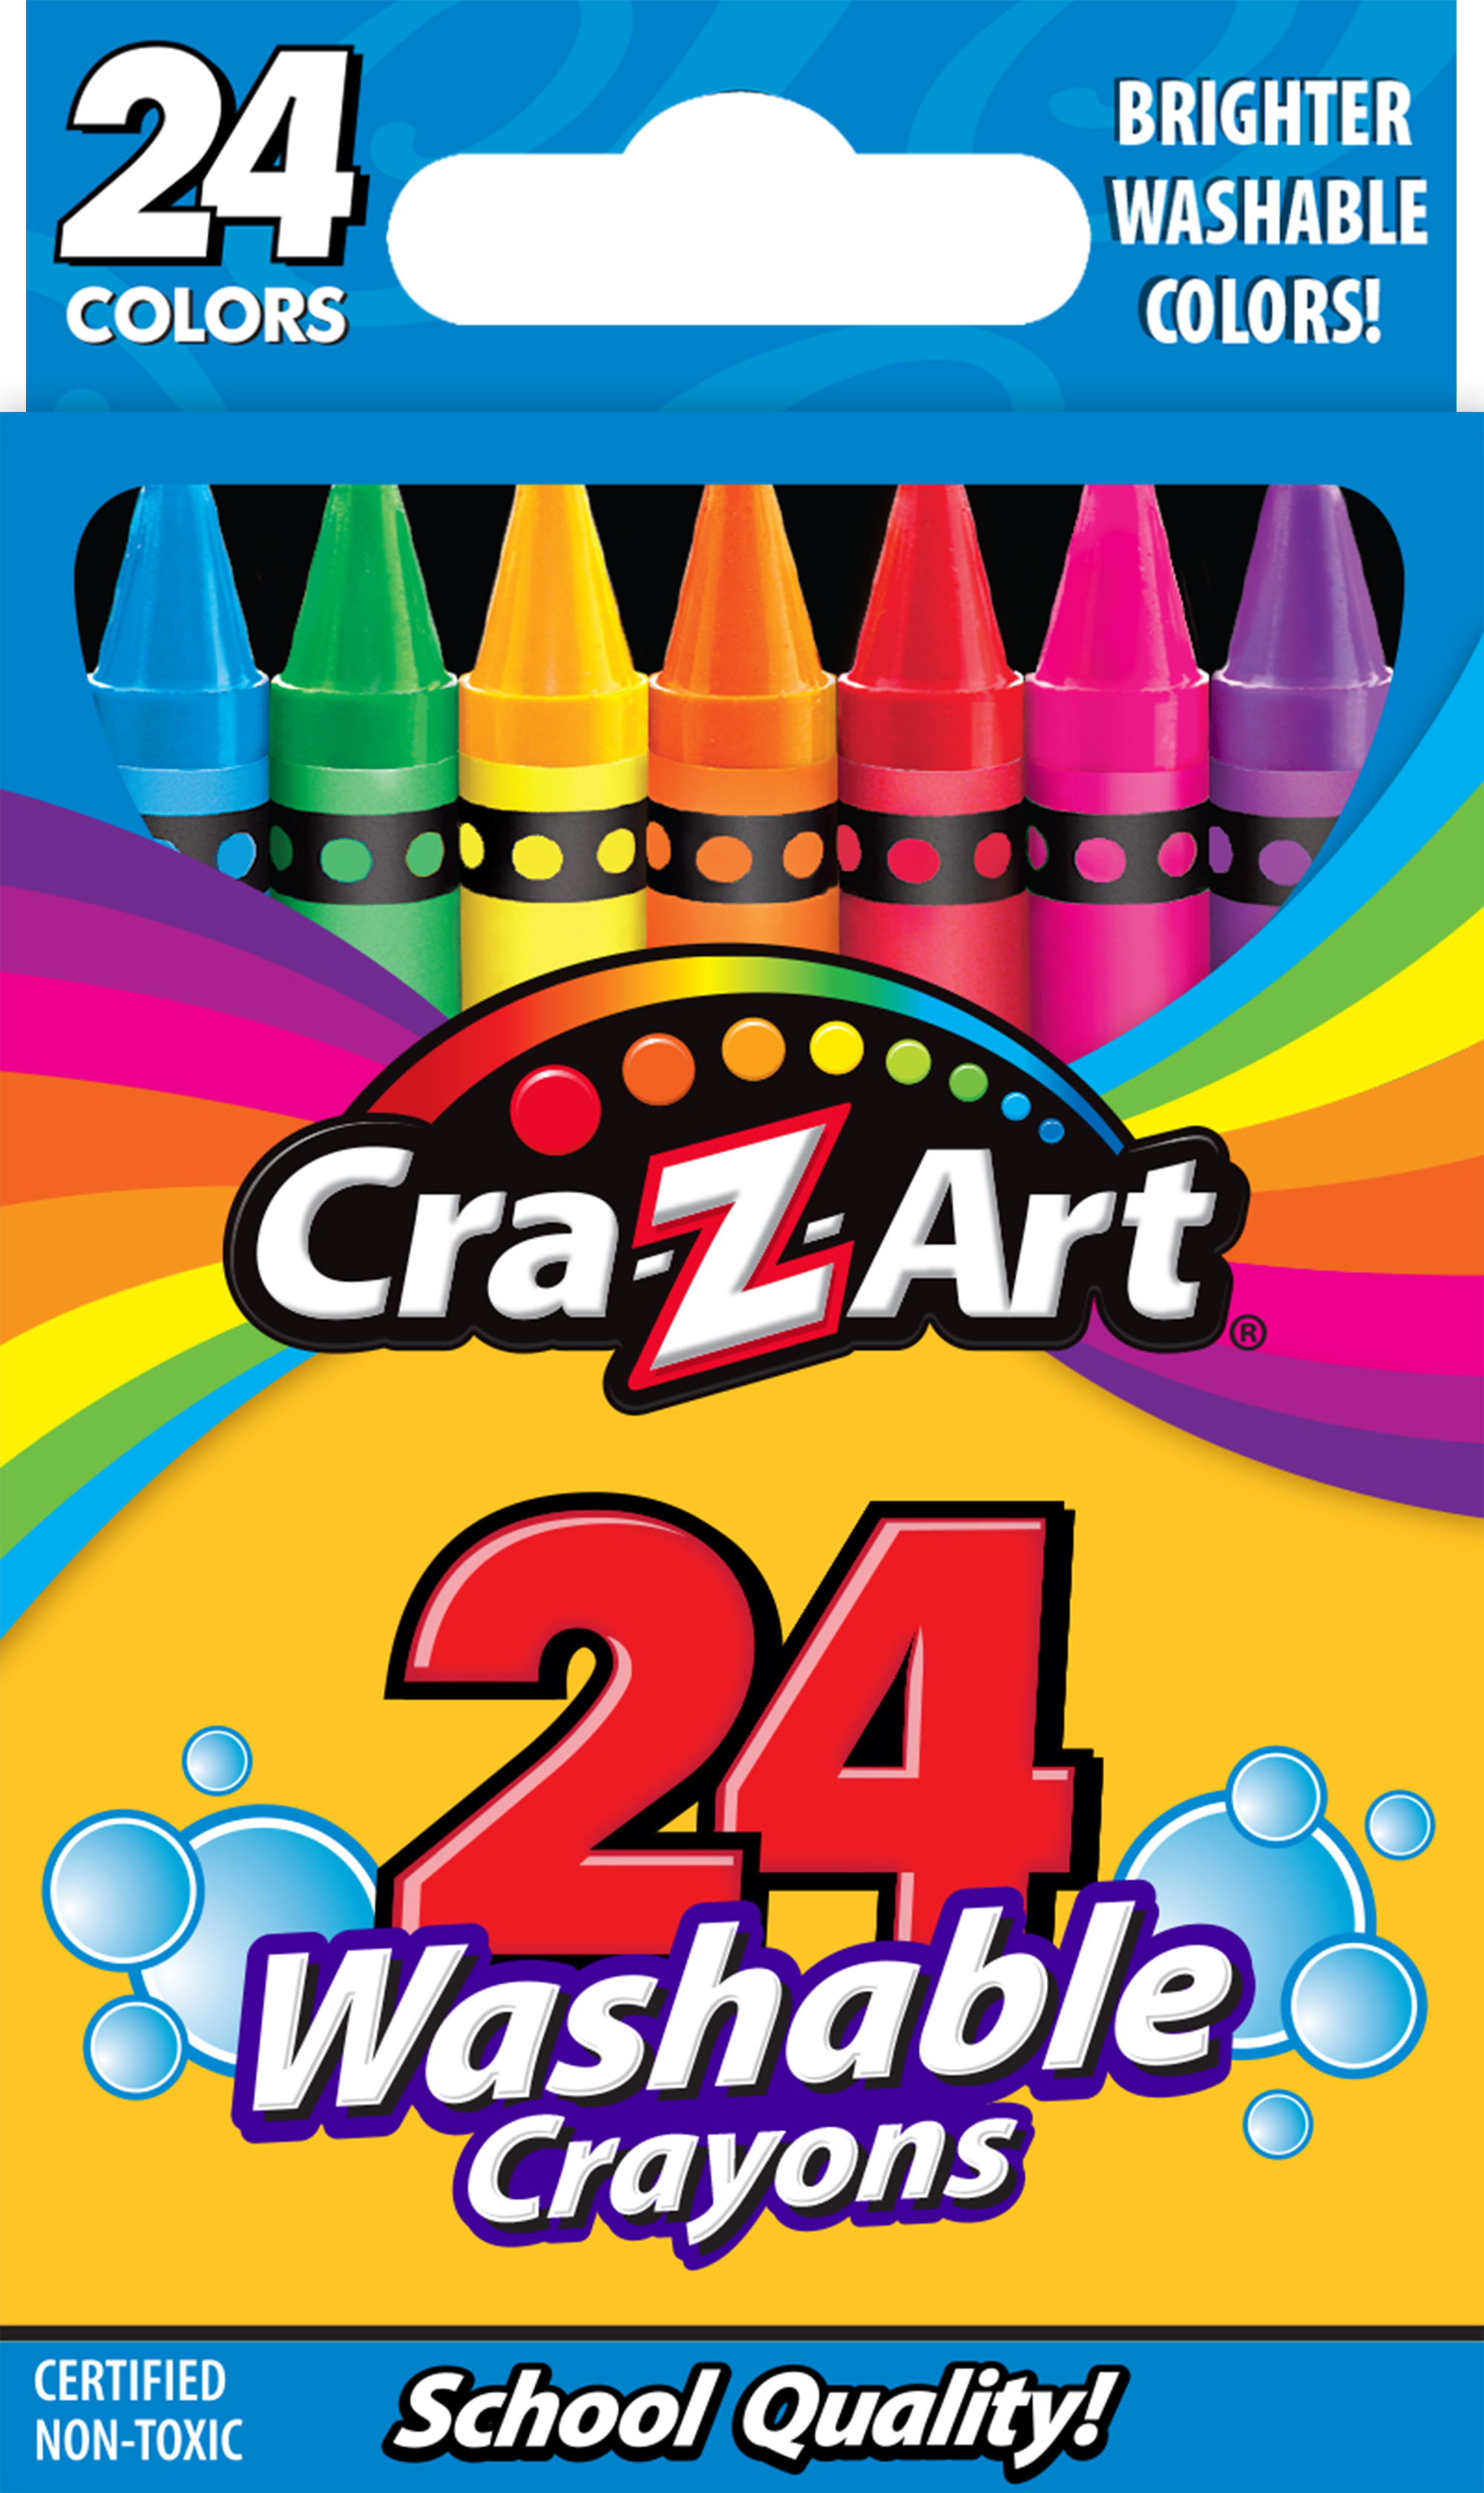 Cra-Z-Art Washable Crayons, 24 Count - image 1 of 8